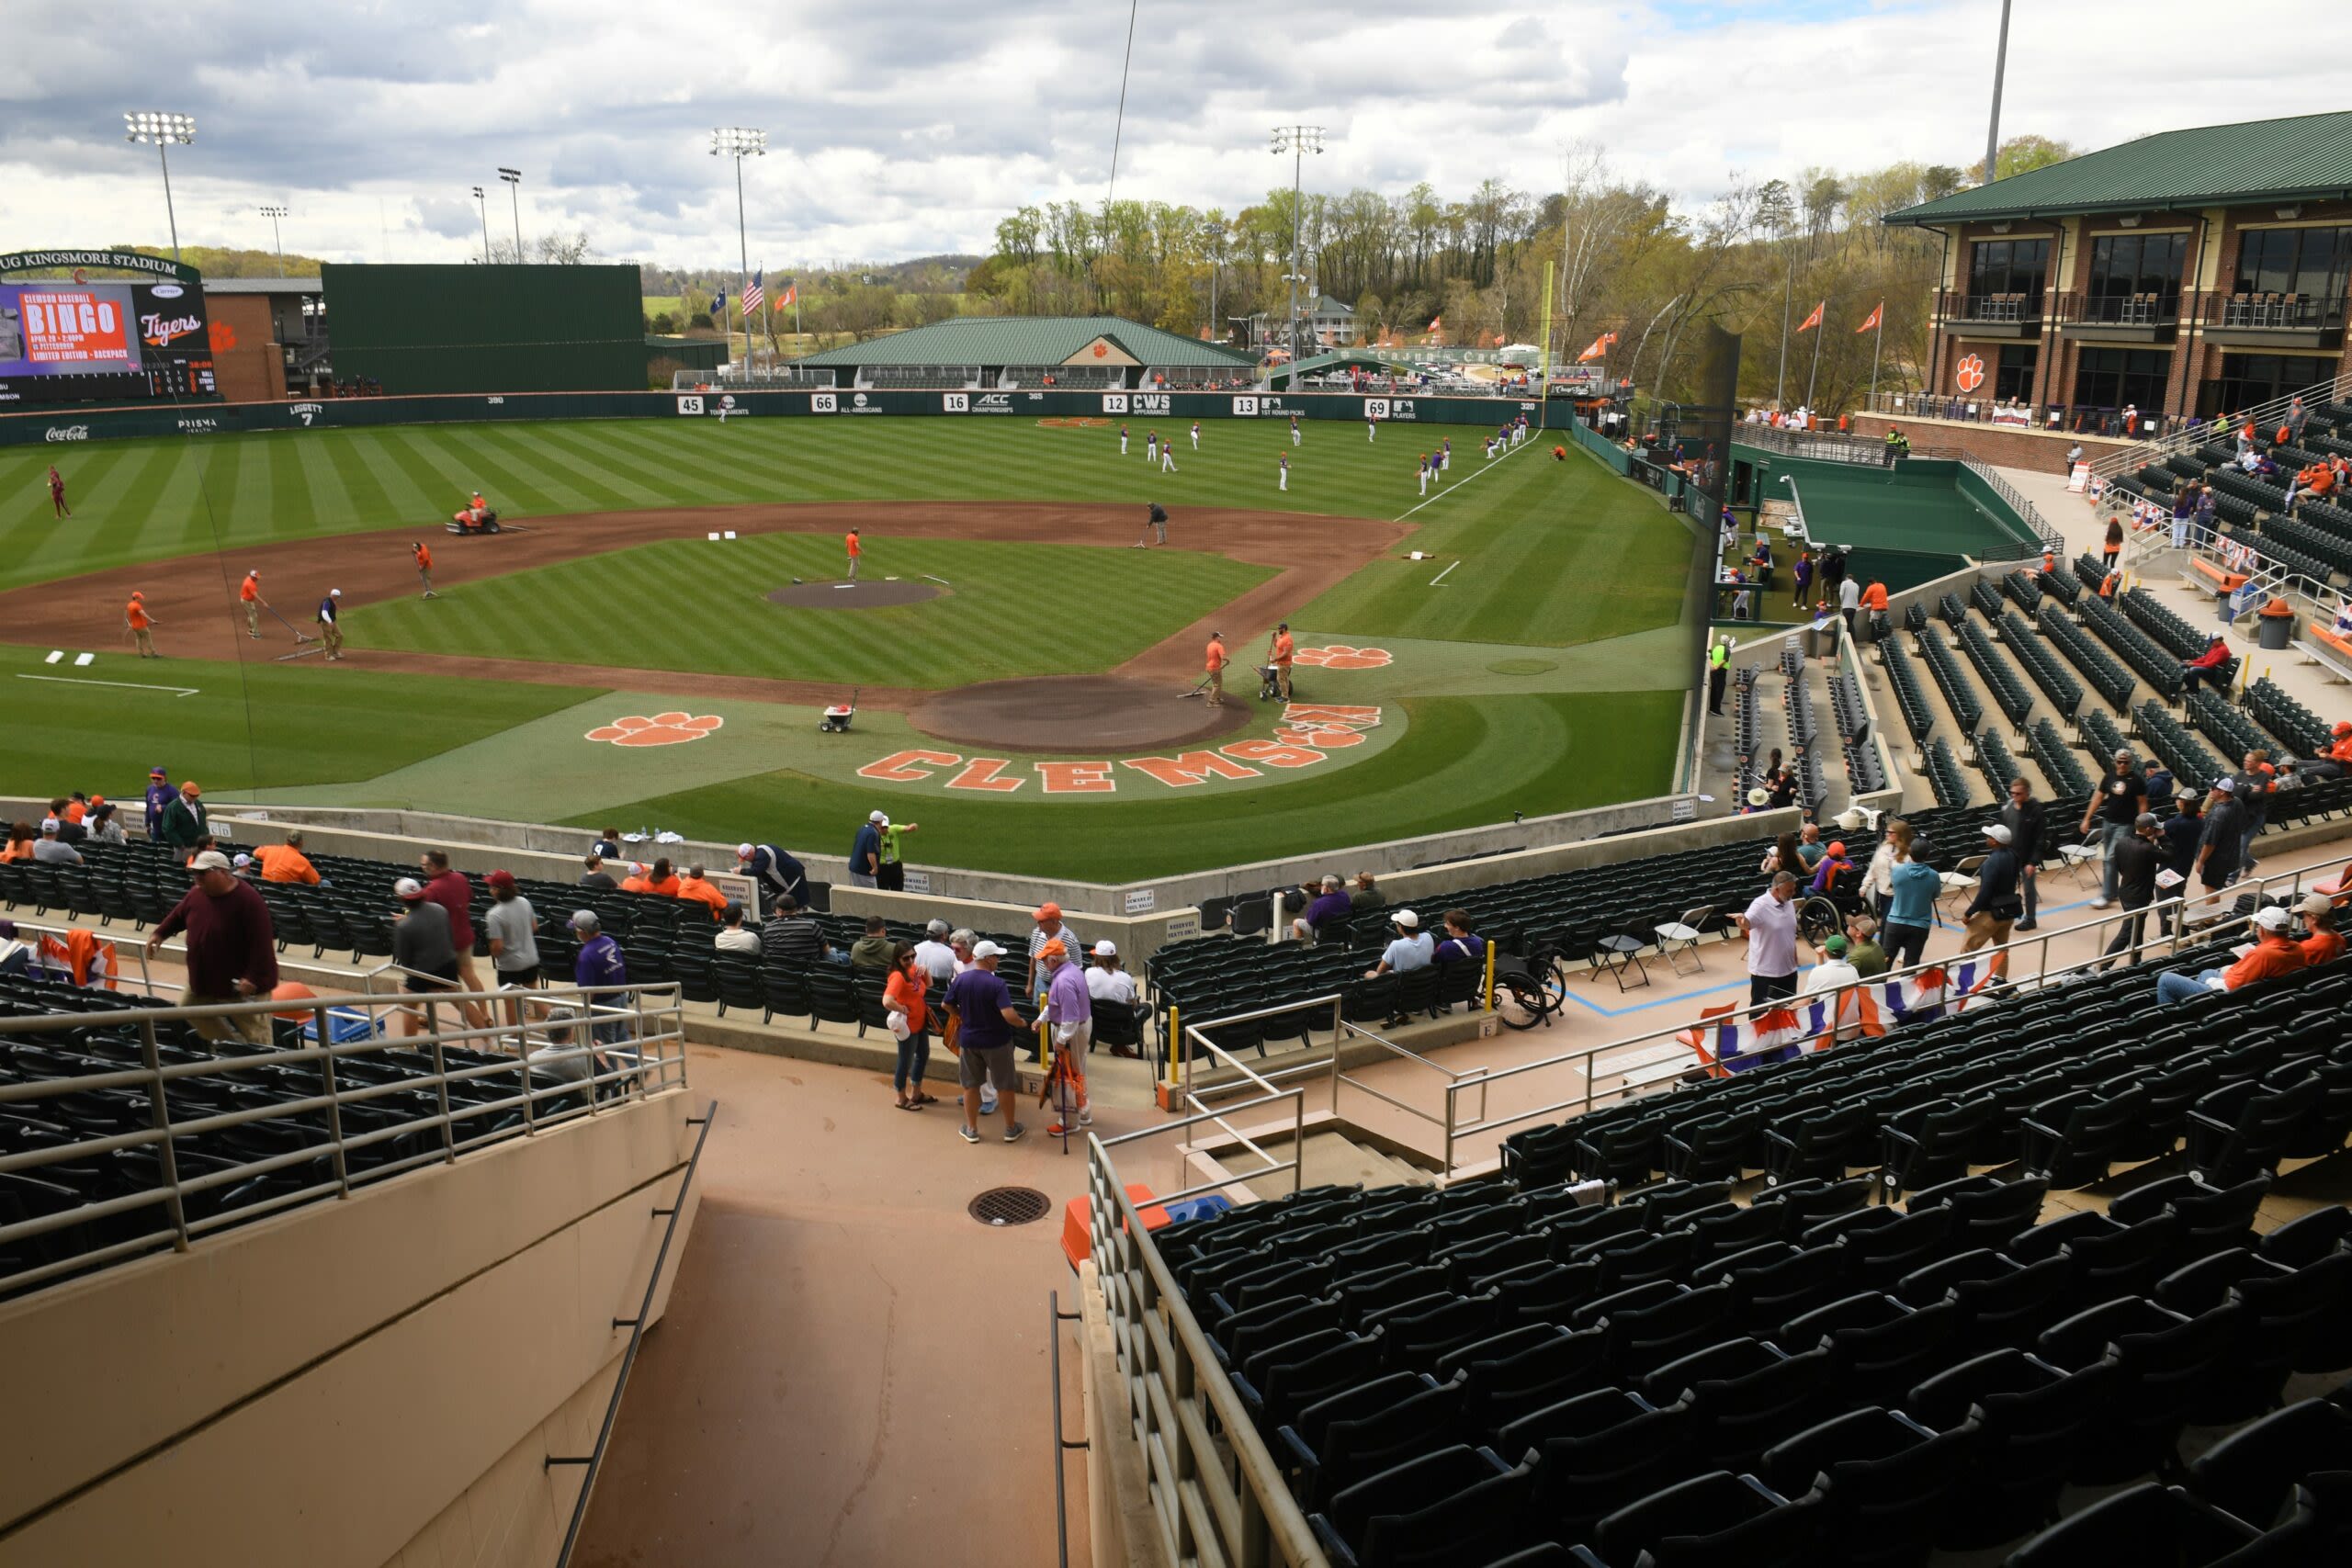 Clemson baseball faces tougher Regional draw in new projections